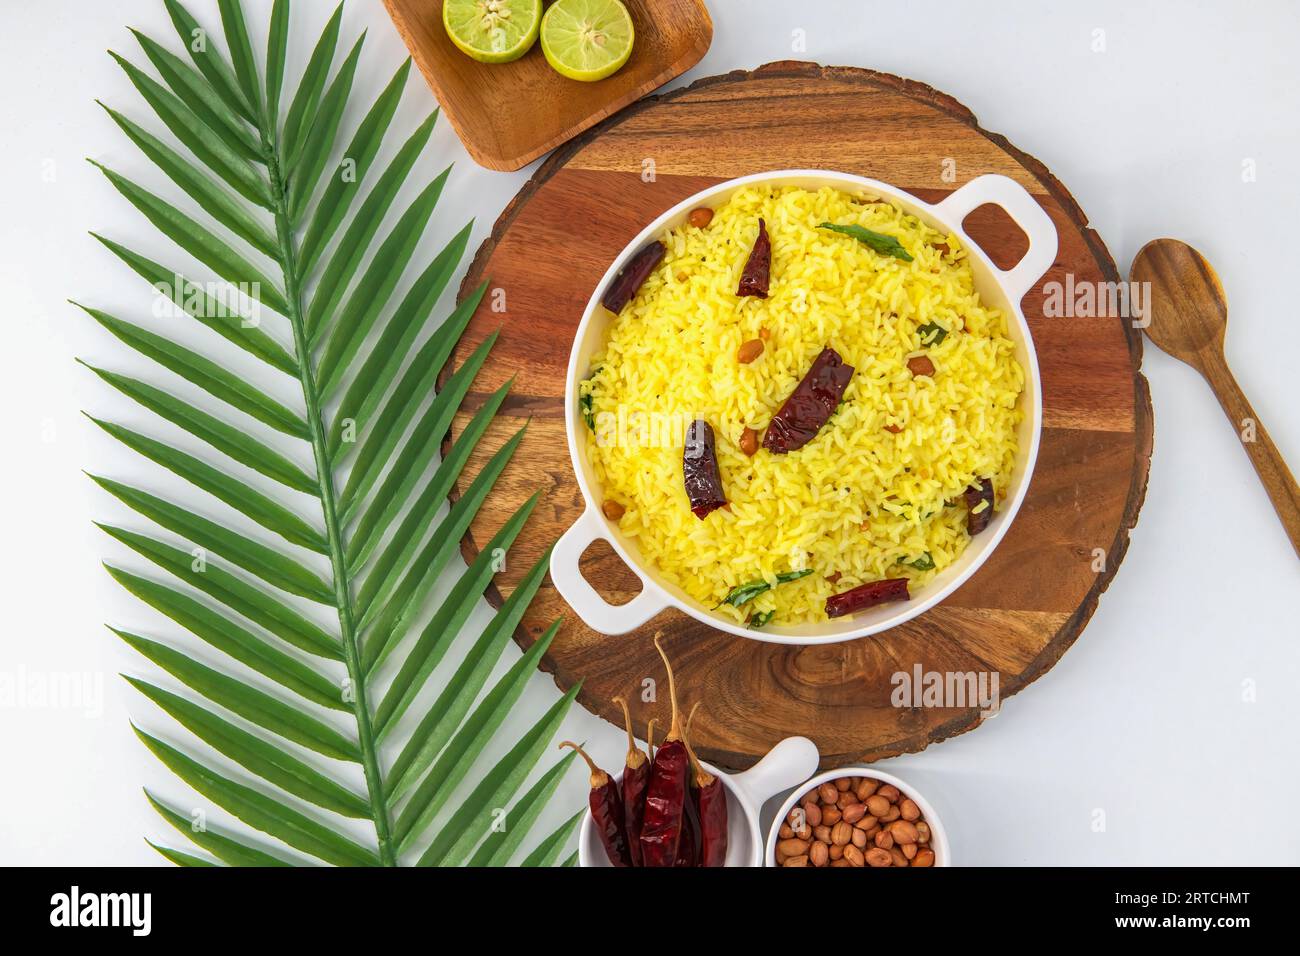 Fresh, delicious and refreshing lemon rice dish for breakfast, lunch and dinner. Famous Indian rice recipe with cooked rice, tempting spices, peanut. Stock Photo